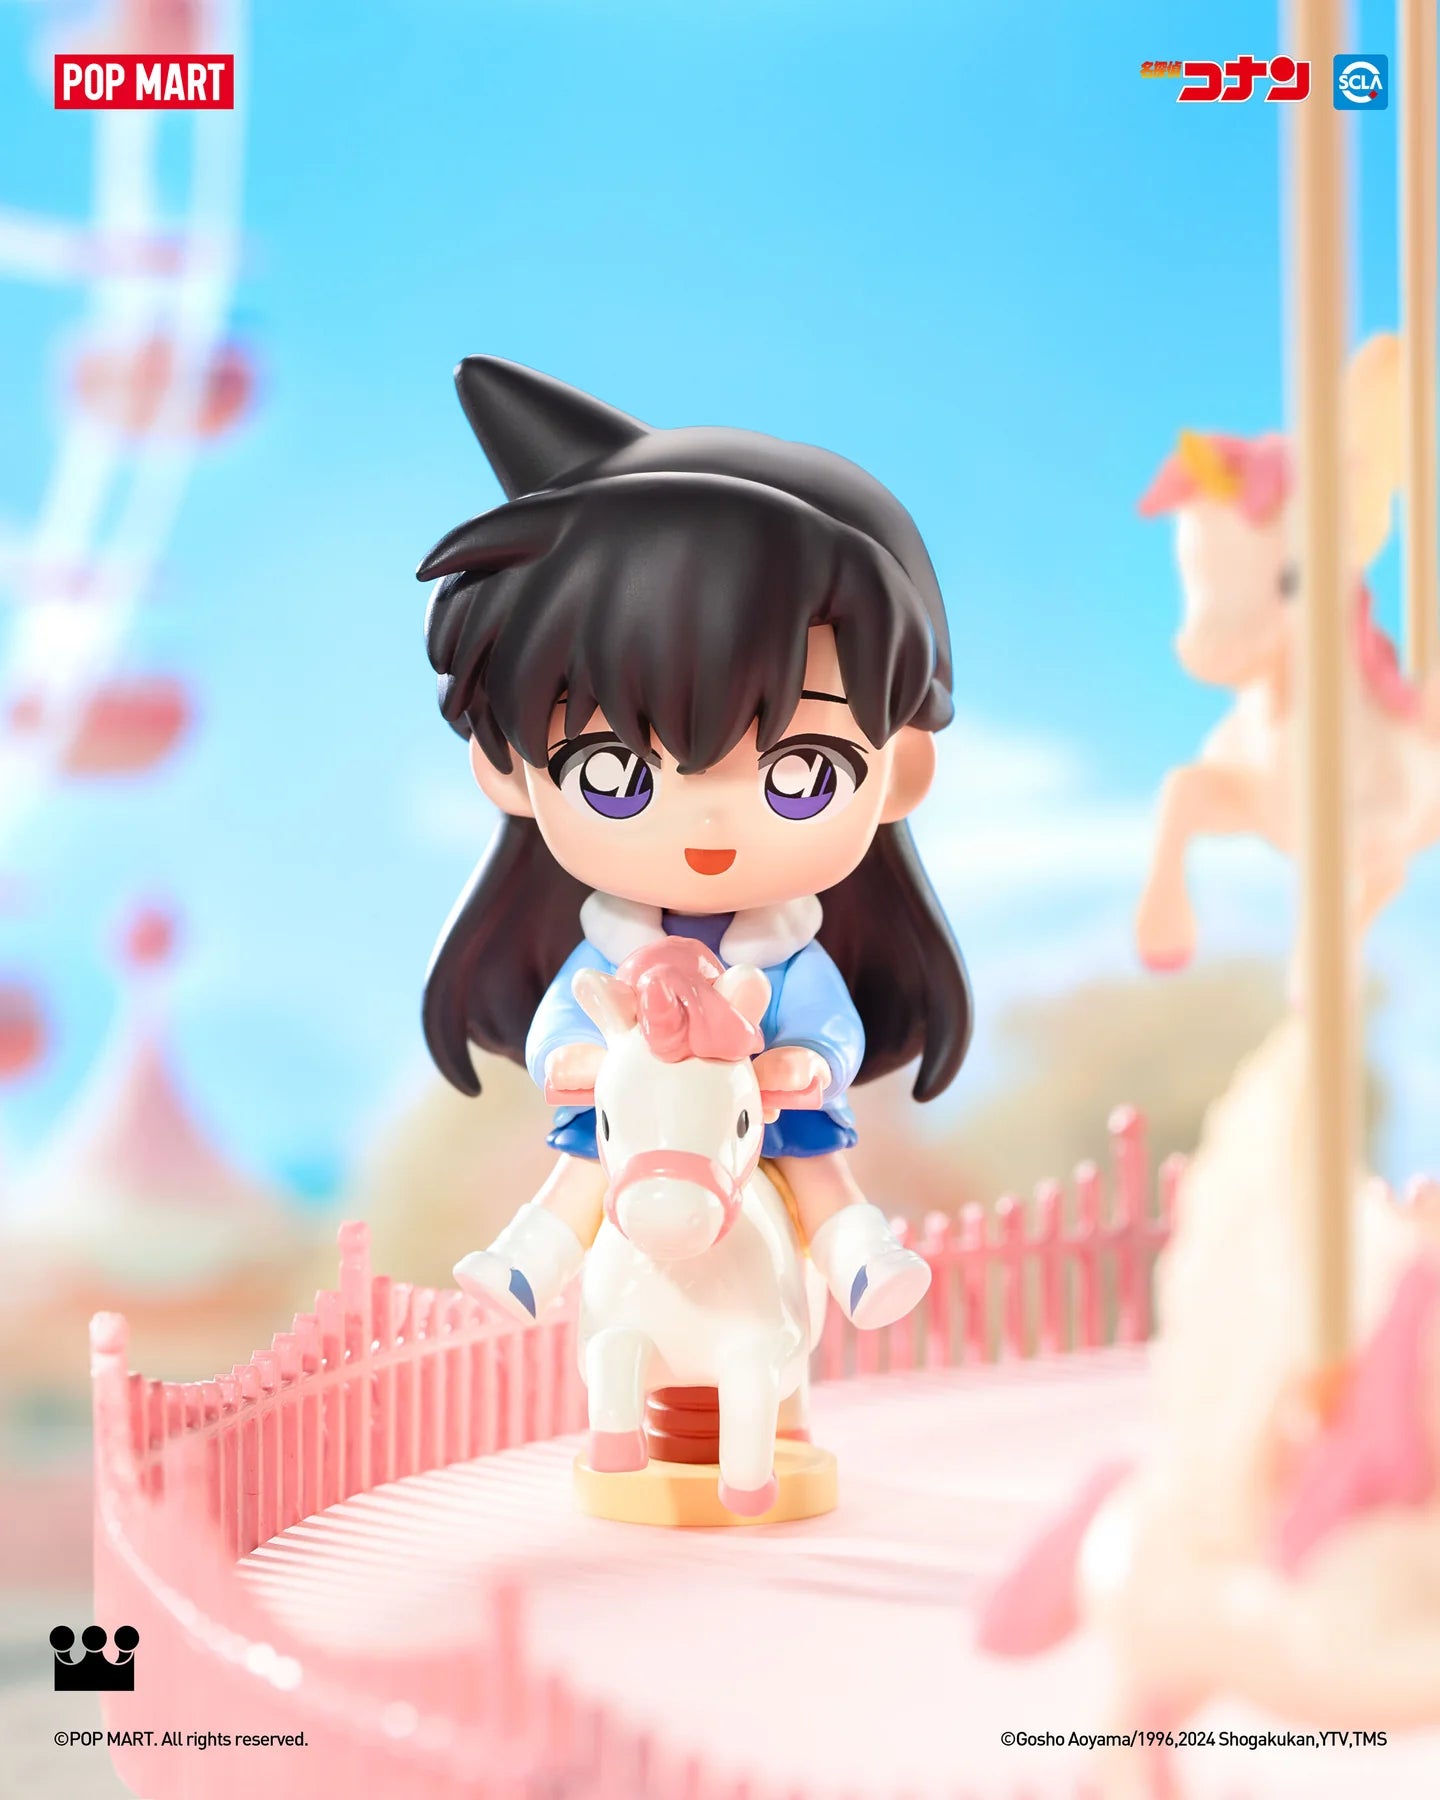 Detective Conan Carnival Blind Box Series: Toy figurine of a girl on a carousel with a toy horse and a girl riding it.